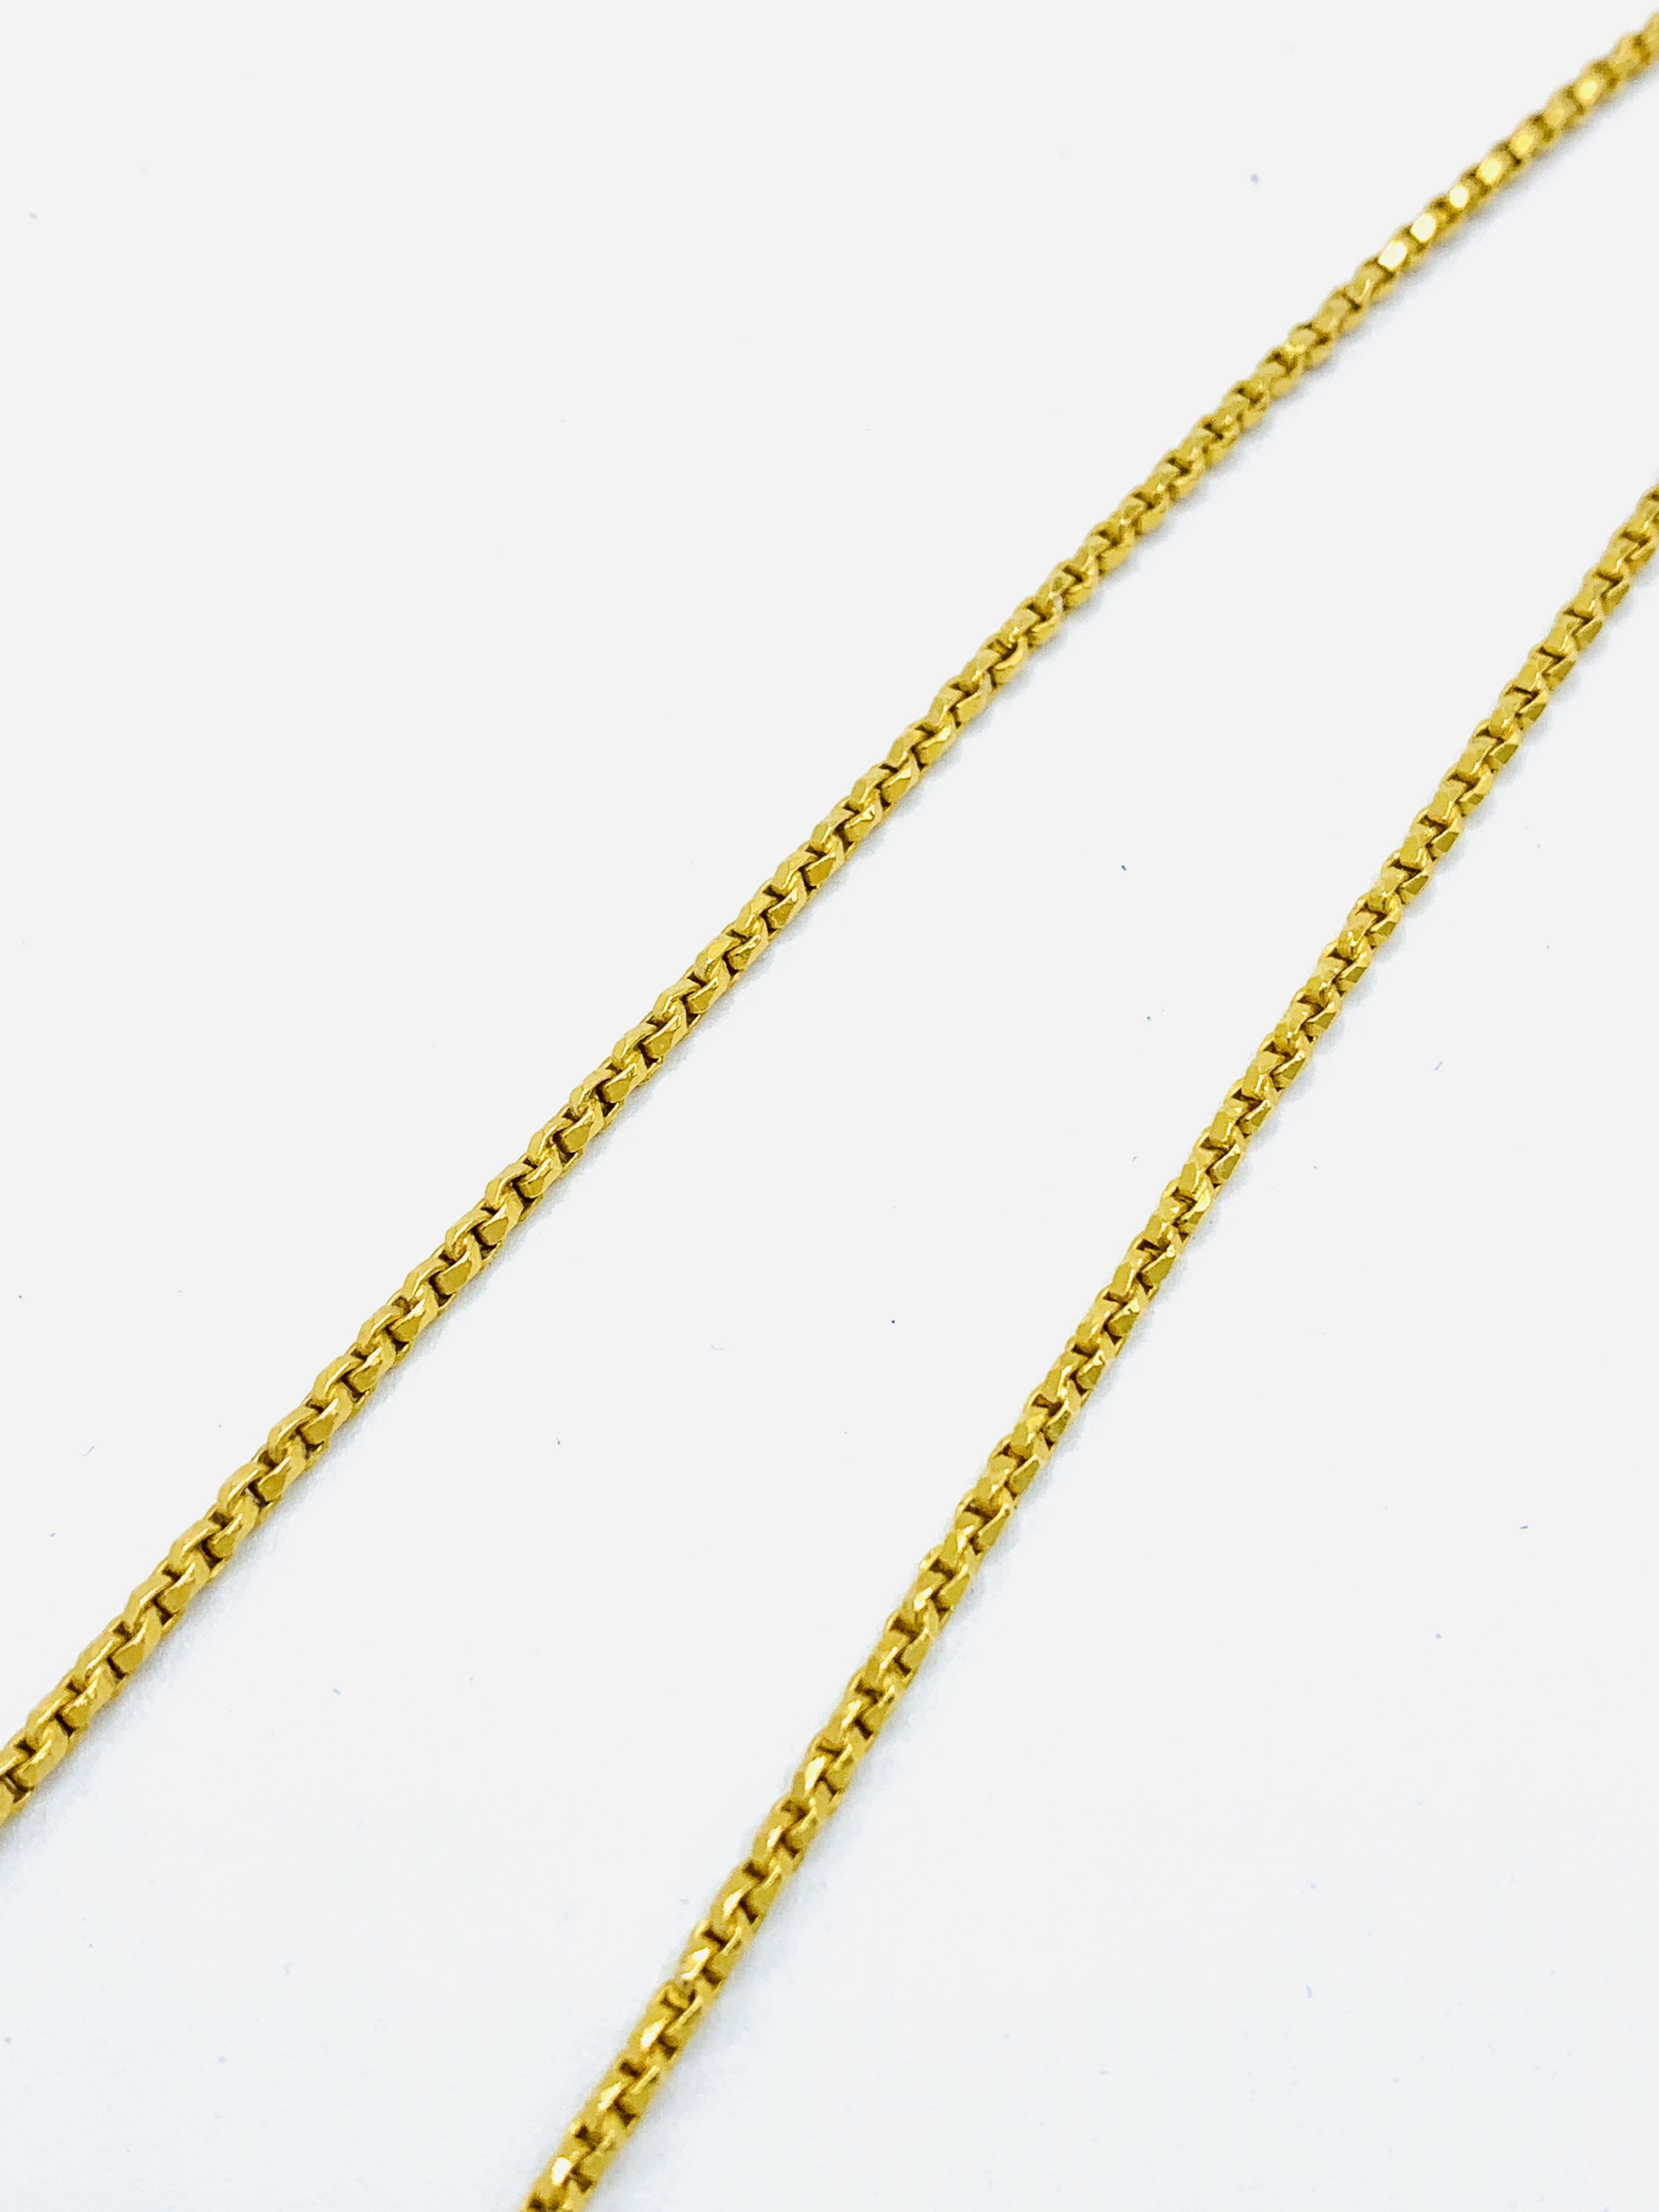 18ct gold chain - Image 4 of 5